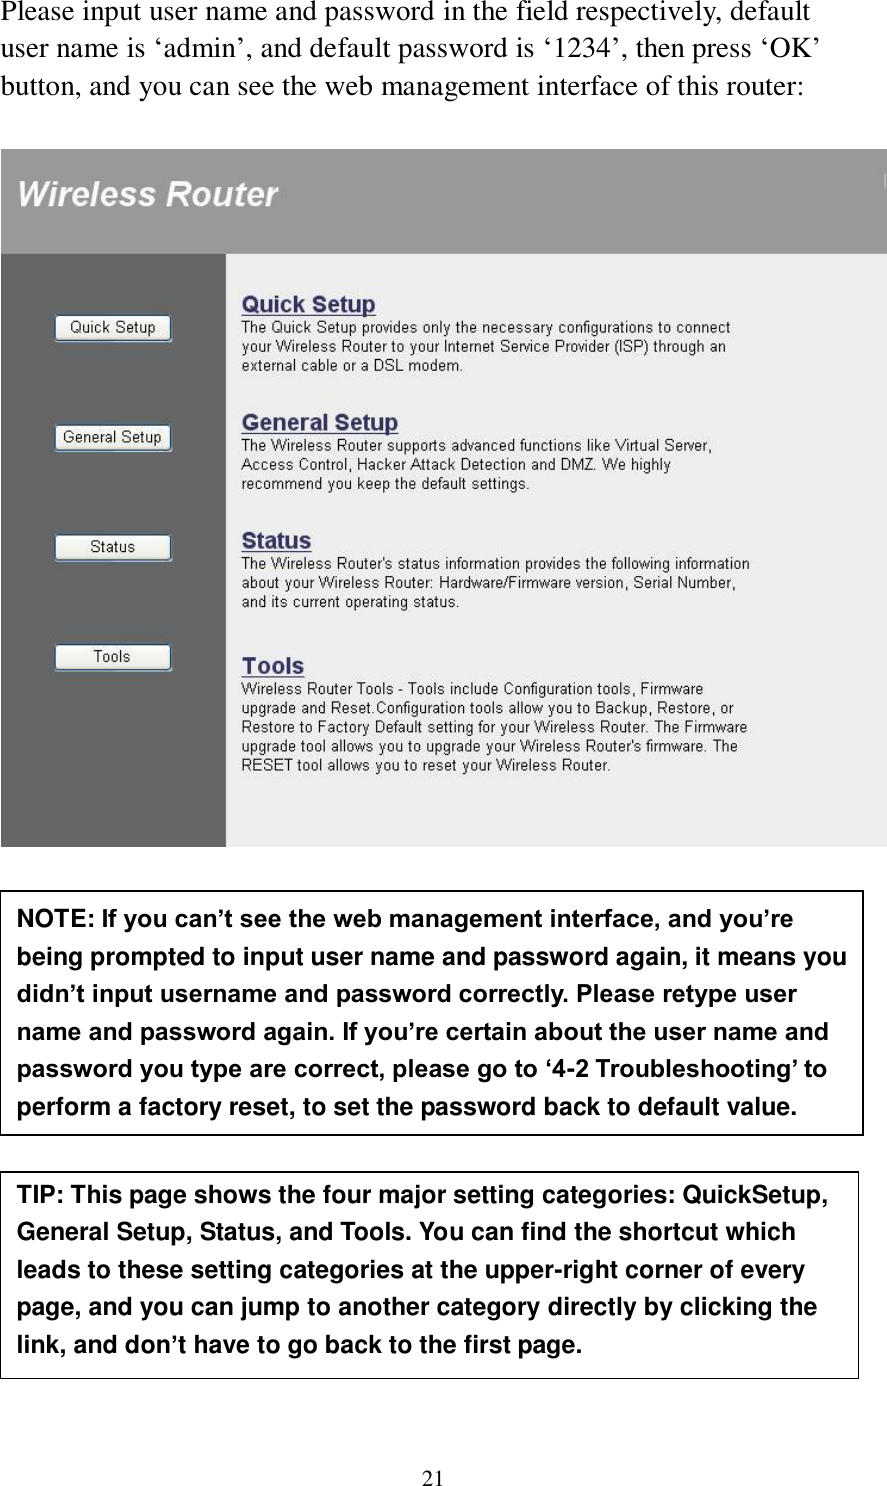 21 Please input user name and password in the field respectively, default user name is „admin‟, and default password is „1234‟, then press „OK‟ button, and you can see the web management interface of this router:             NOTE: If you can’t see the web management interface, and you’re being prompted to input user name and password again, it means you didn’t input username and password correctly. Please retype user name and password again. If you’re certain about the user name and password you type are correct, please go to ‘4-2 Troubleshooting’ to perform a factory reset, to set the password back to default value.  TIP: This page shows the four major setting categories: QuickSetup, General Setup, Status, and Tools. You can find the shortcut which leads to these setting categories at the upper-right corner of every page, and you can jump to another category directly by clicking the link, and don’t have to go back to the first page.  